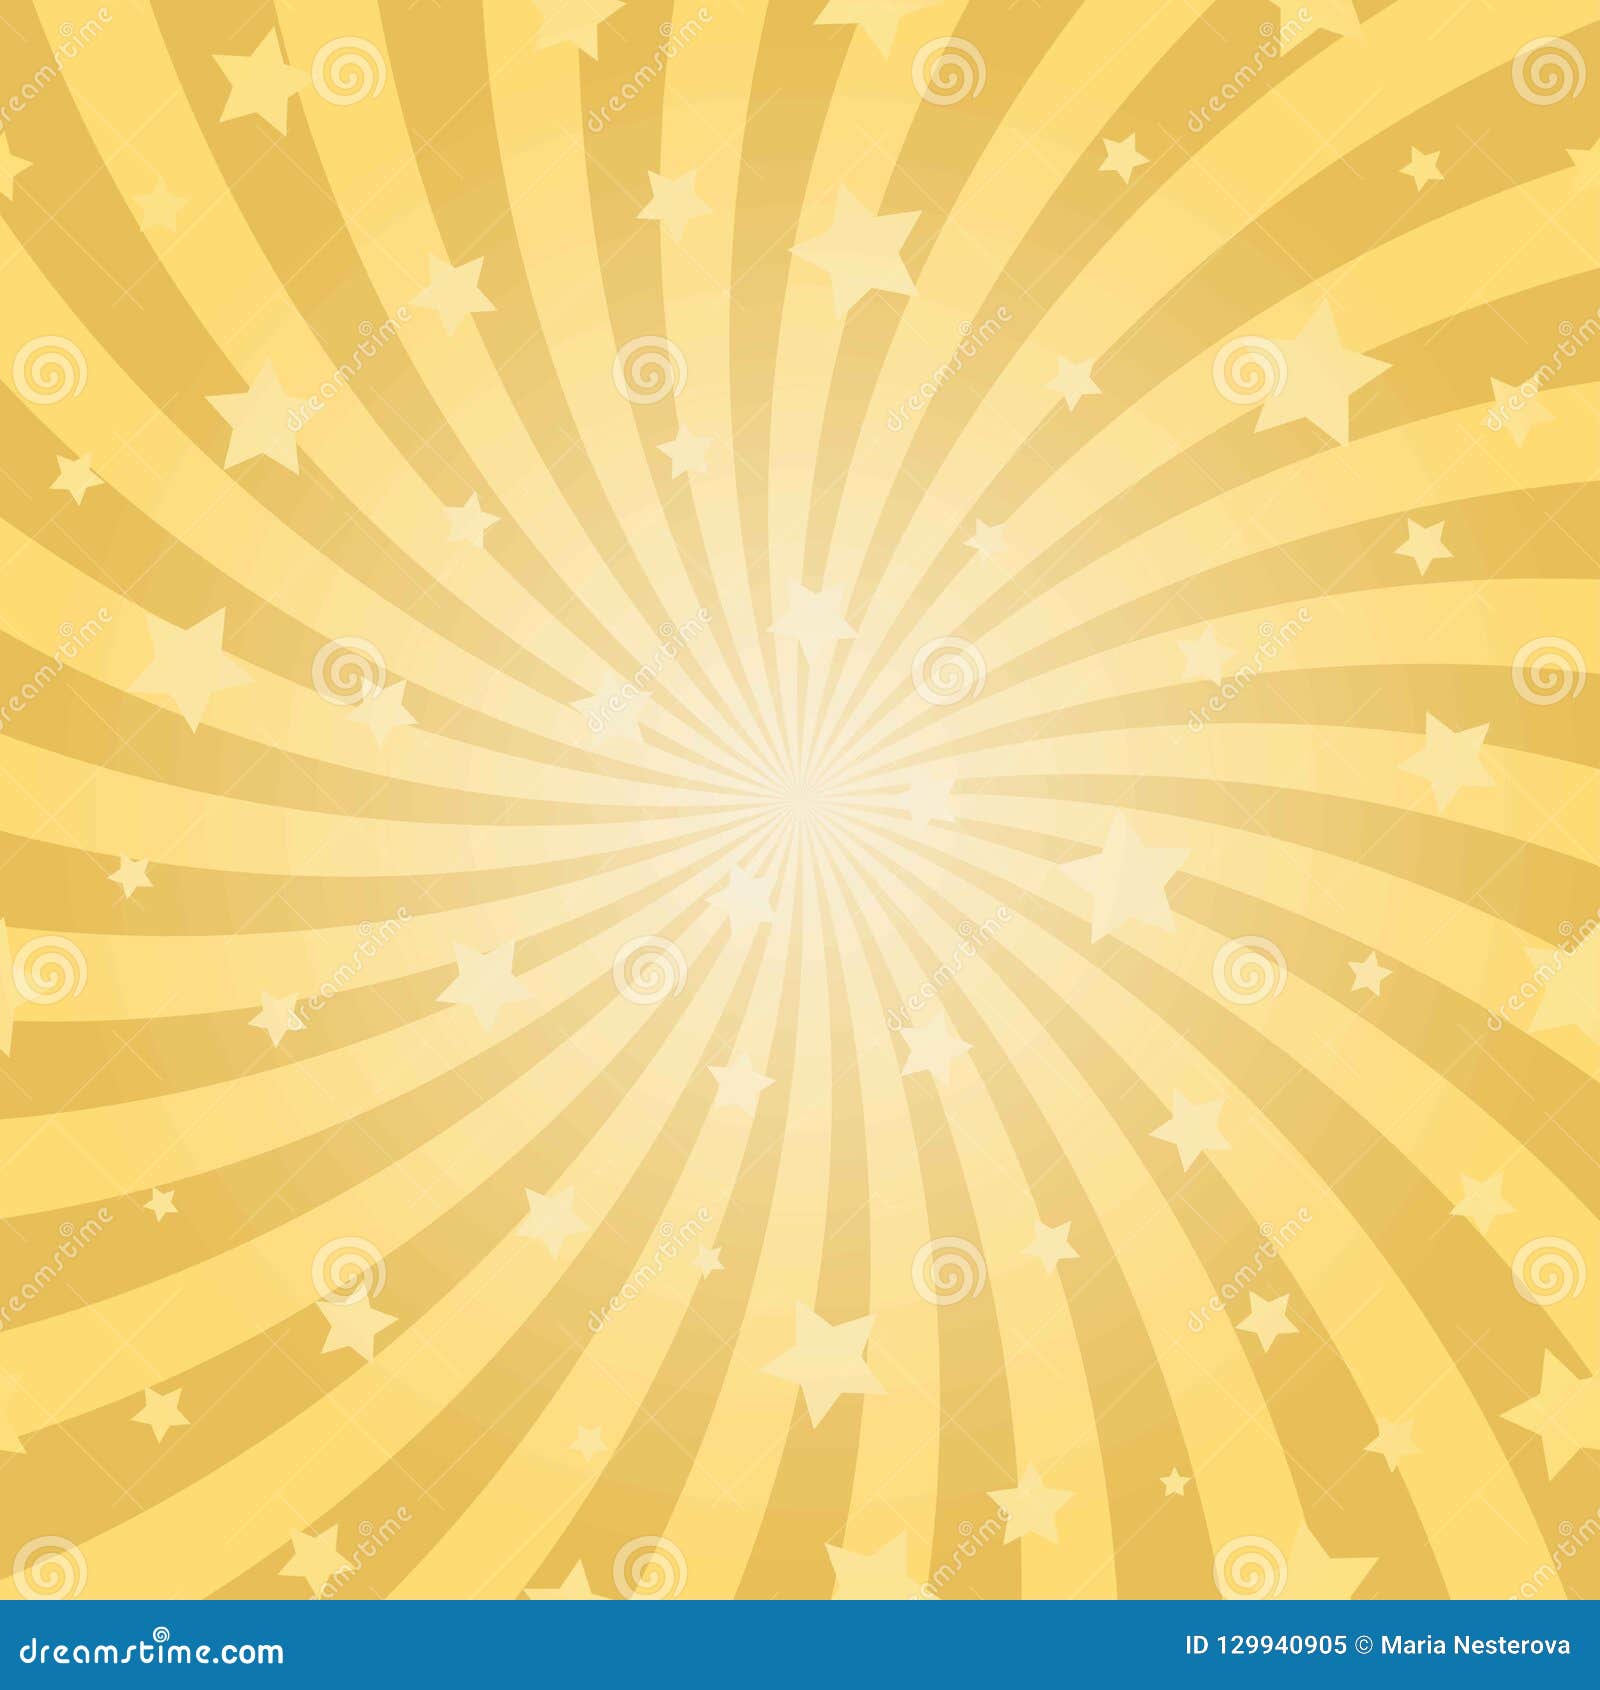 Sunlight Abstract Spiral Background. Gold Yellow Color Burst Background  with Stars Stock Illustration - Illustration of focus, rays: 129940905